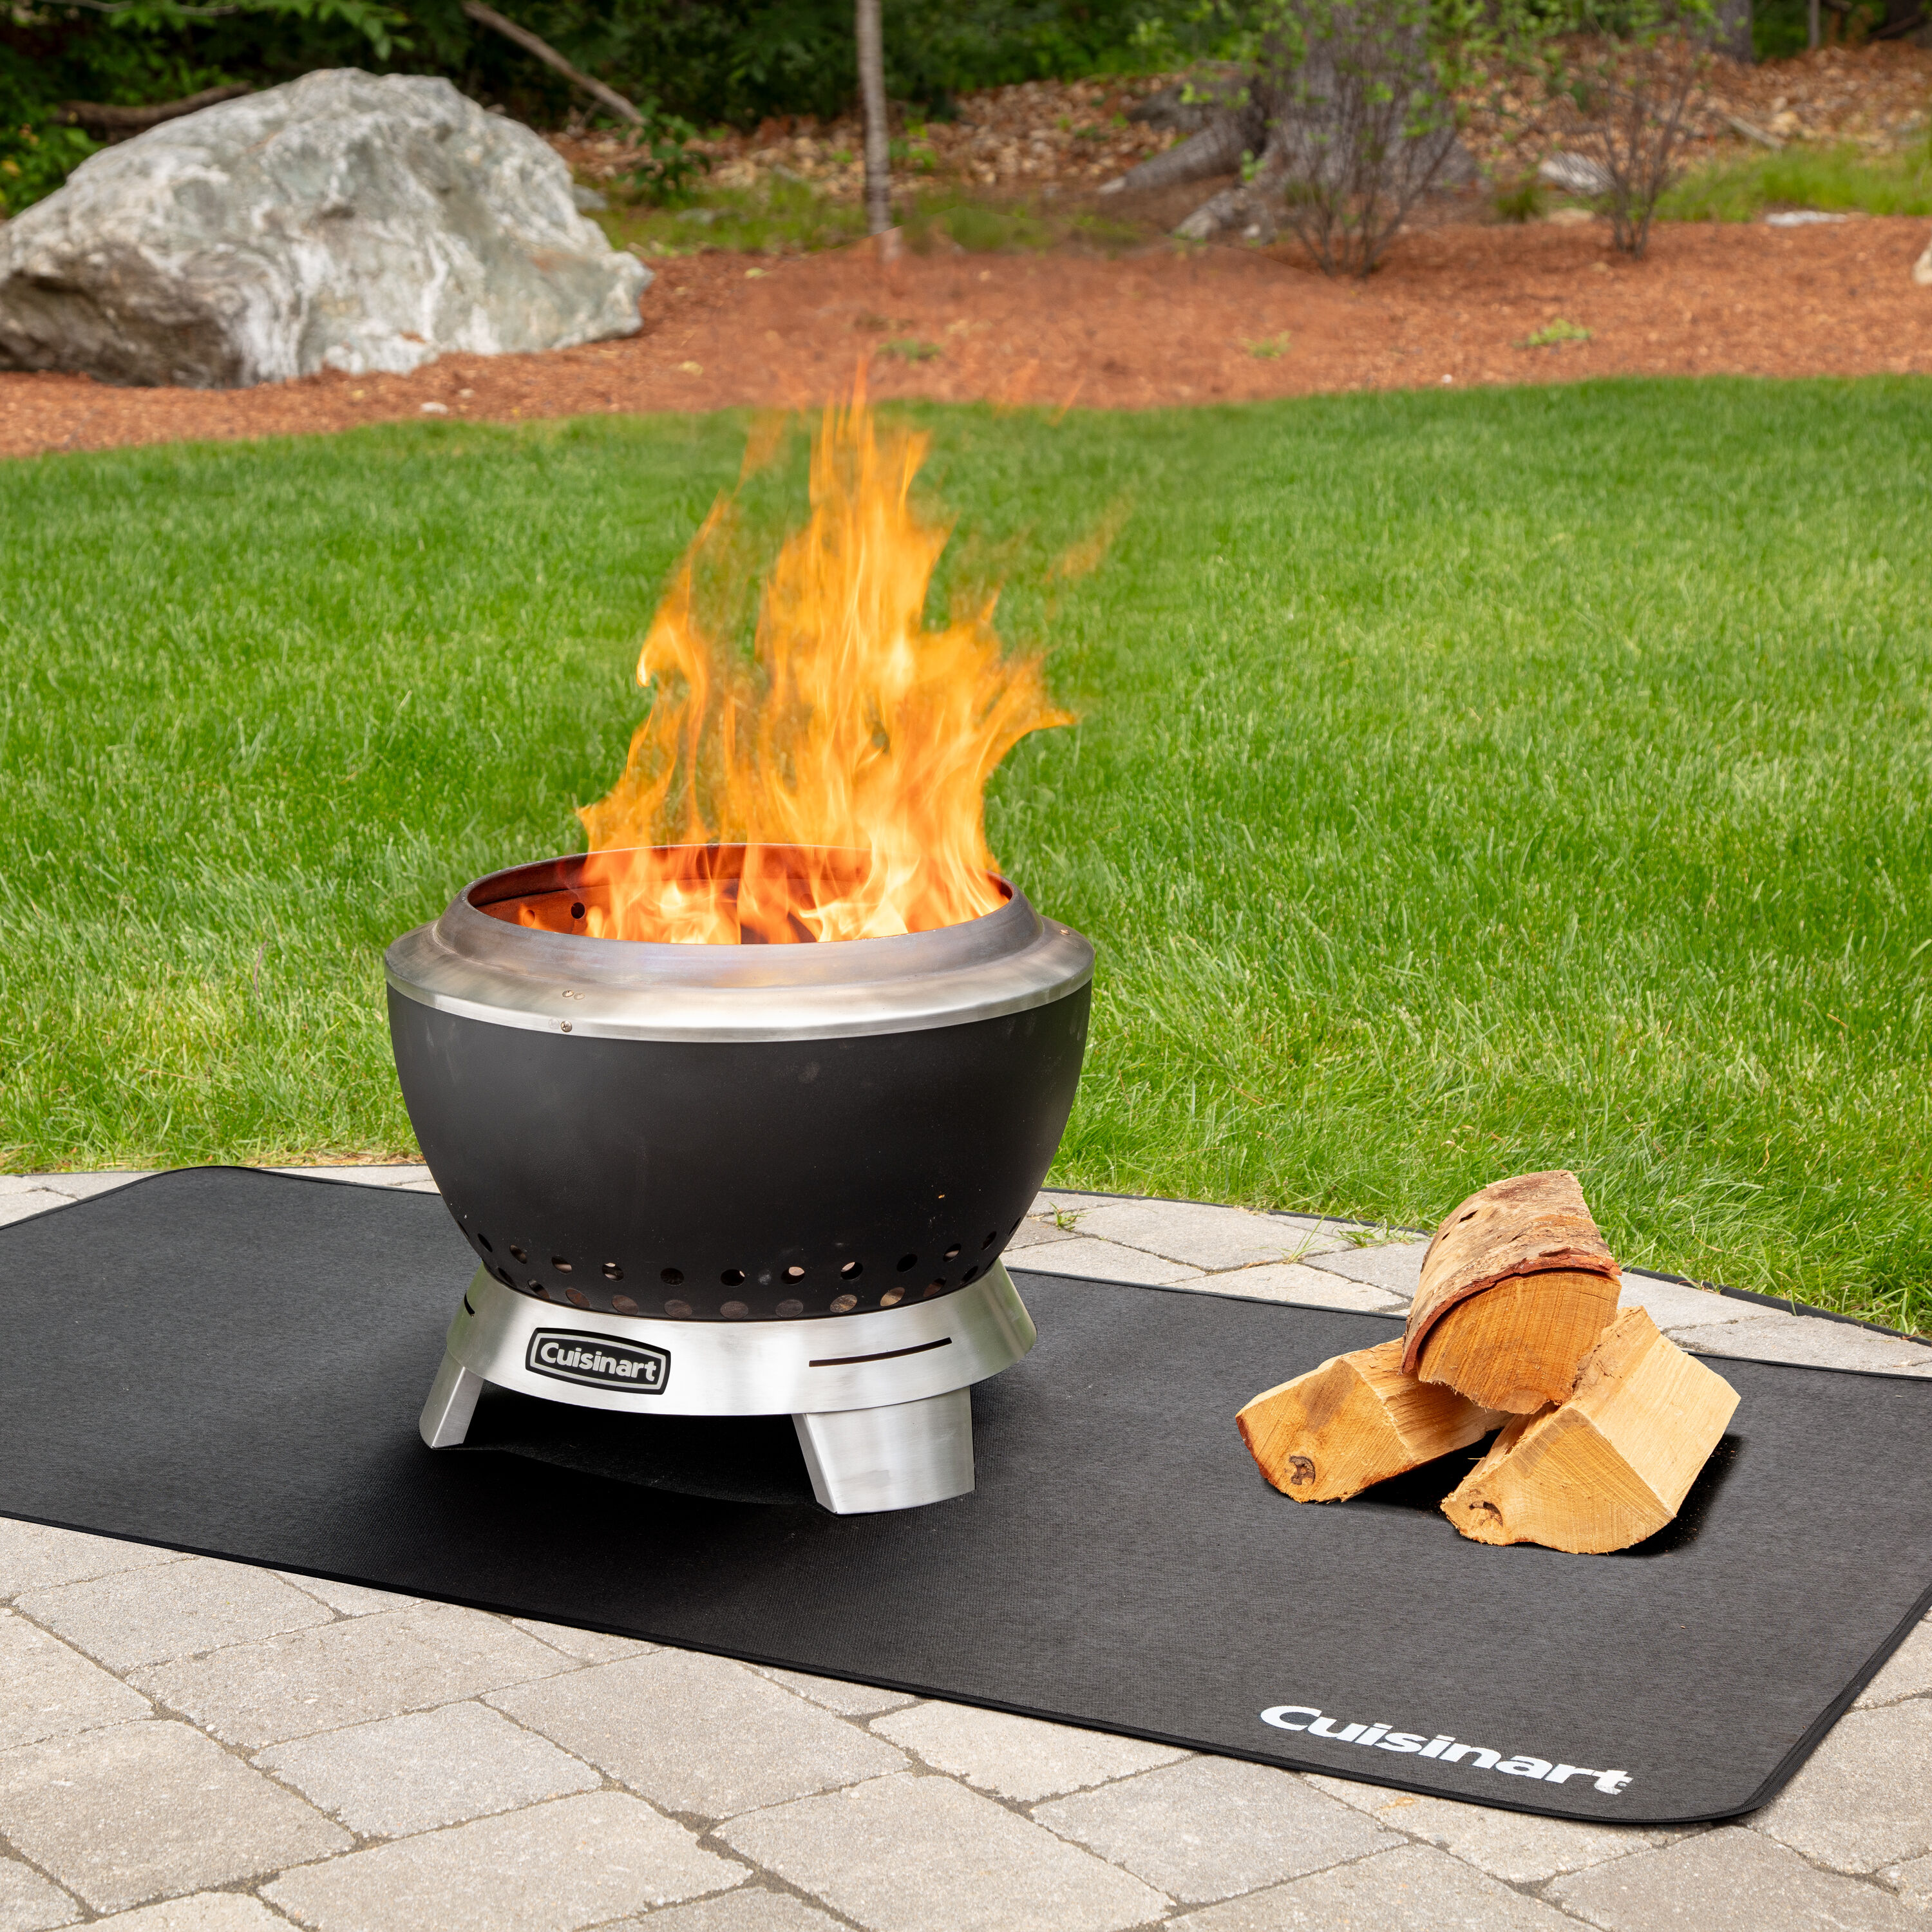 Wood-Burning Fire Pits at Lowes.com